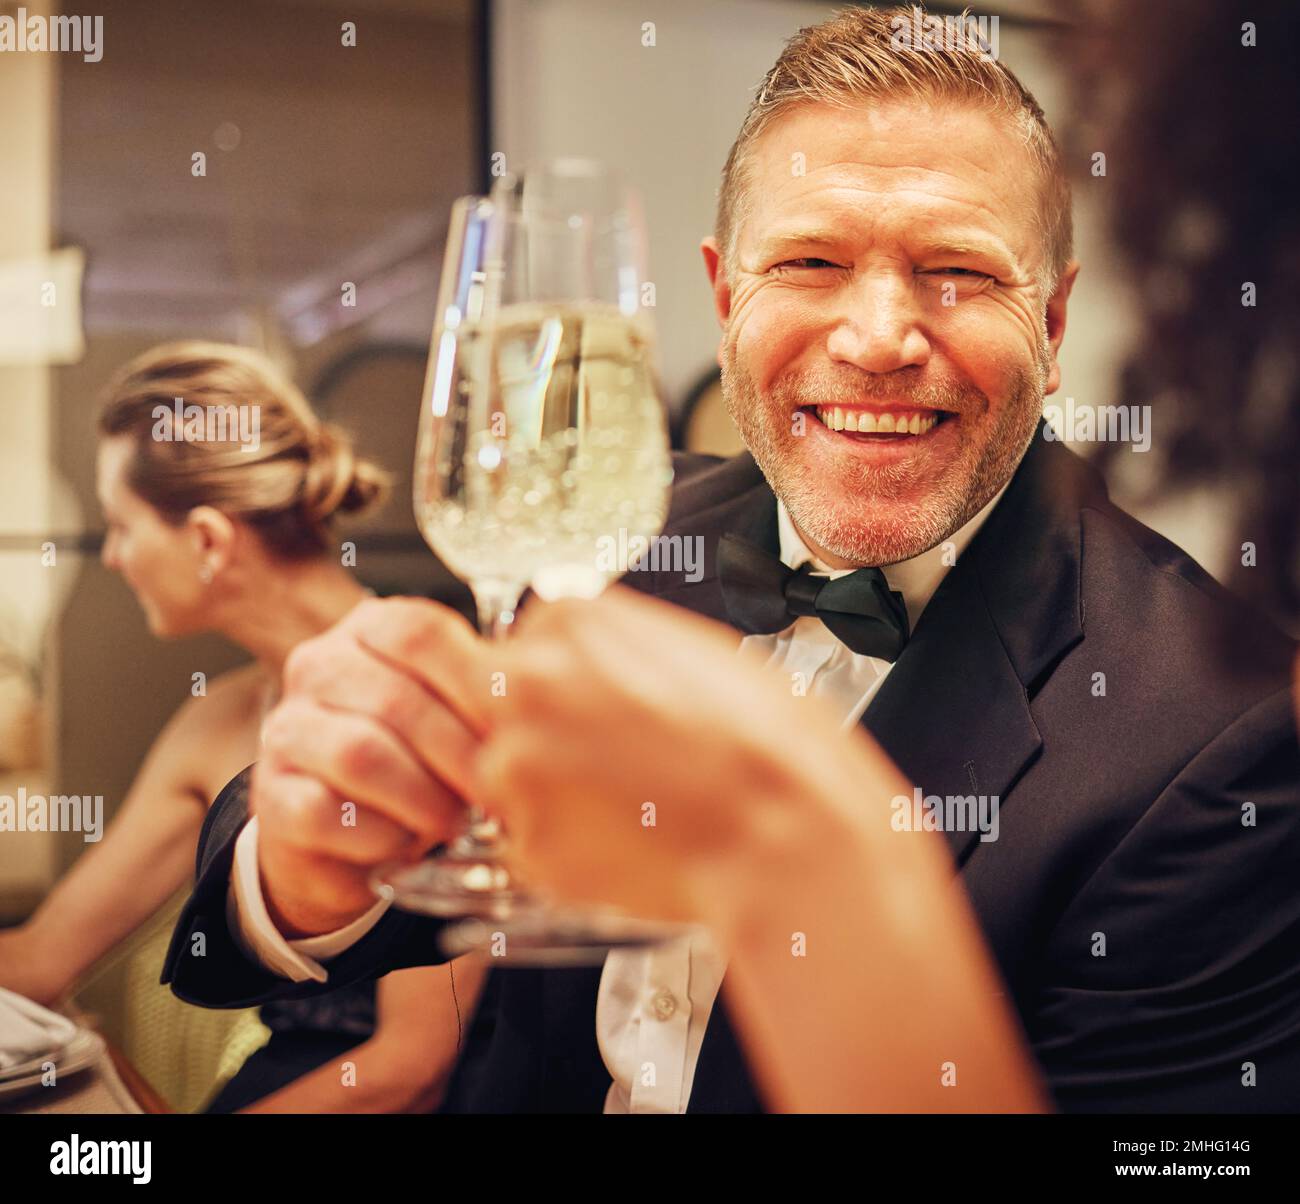 Champagne, cheers celebrate and party with man in suit, smile on face at formal luxury event. Success, bubbly wine and happy people celebration of Stock Photo